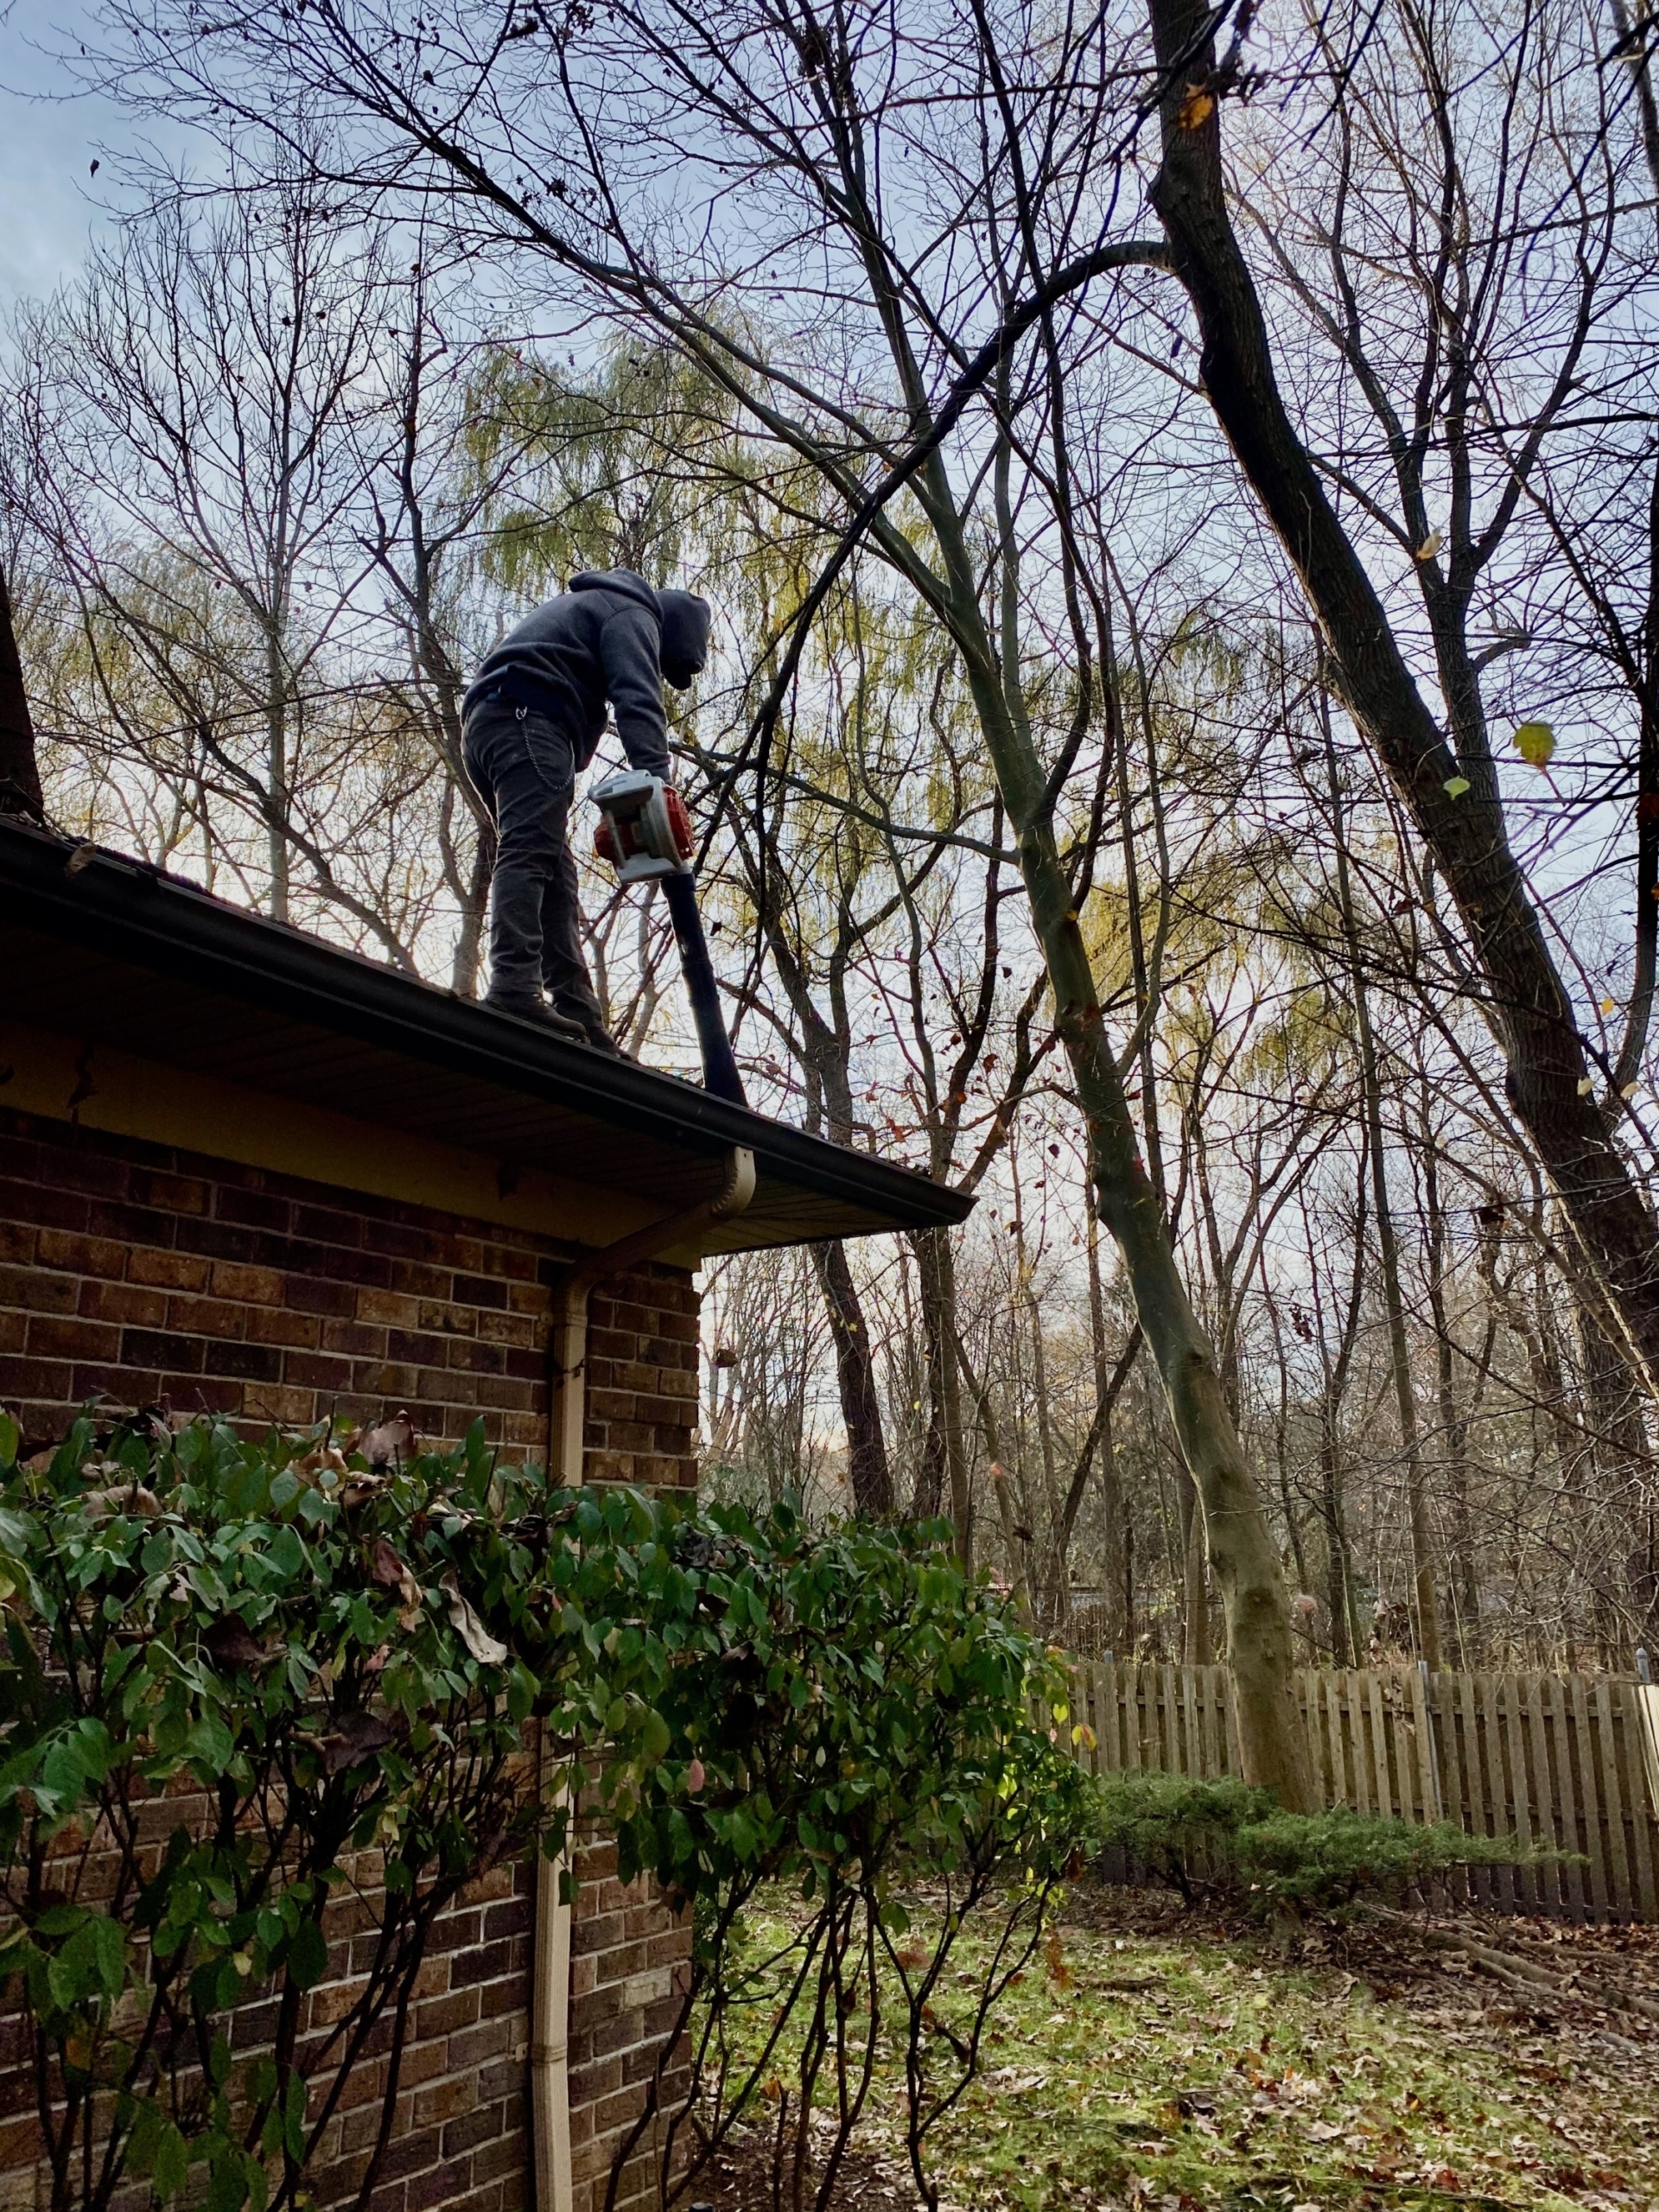 gutter cleaning in ramsey nj by superior seamless gutters